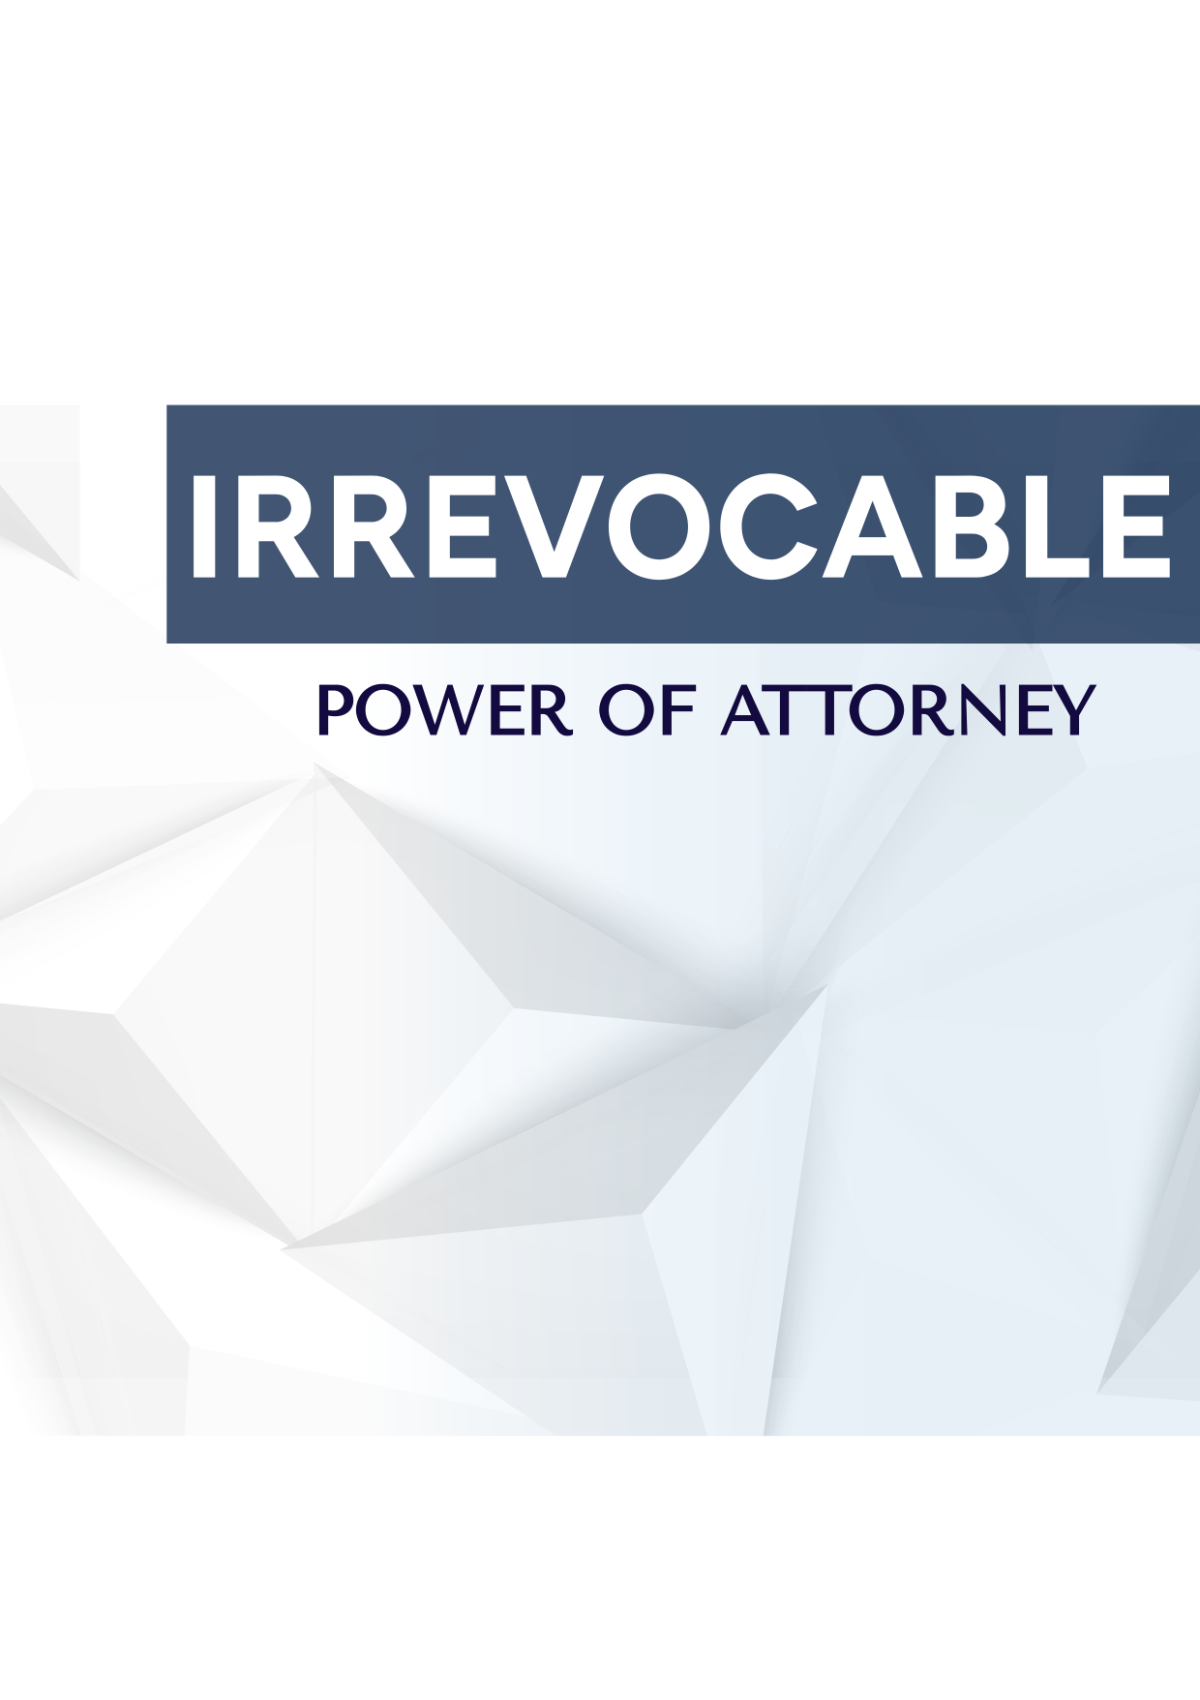 Irrevocable Power of Attorney Template